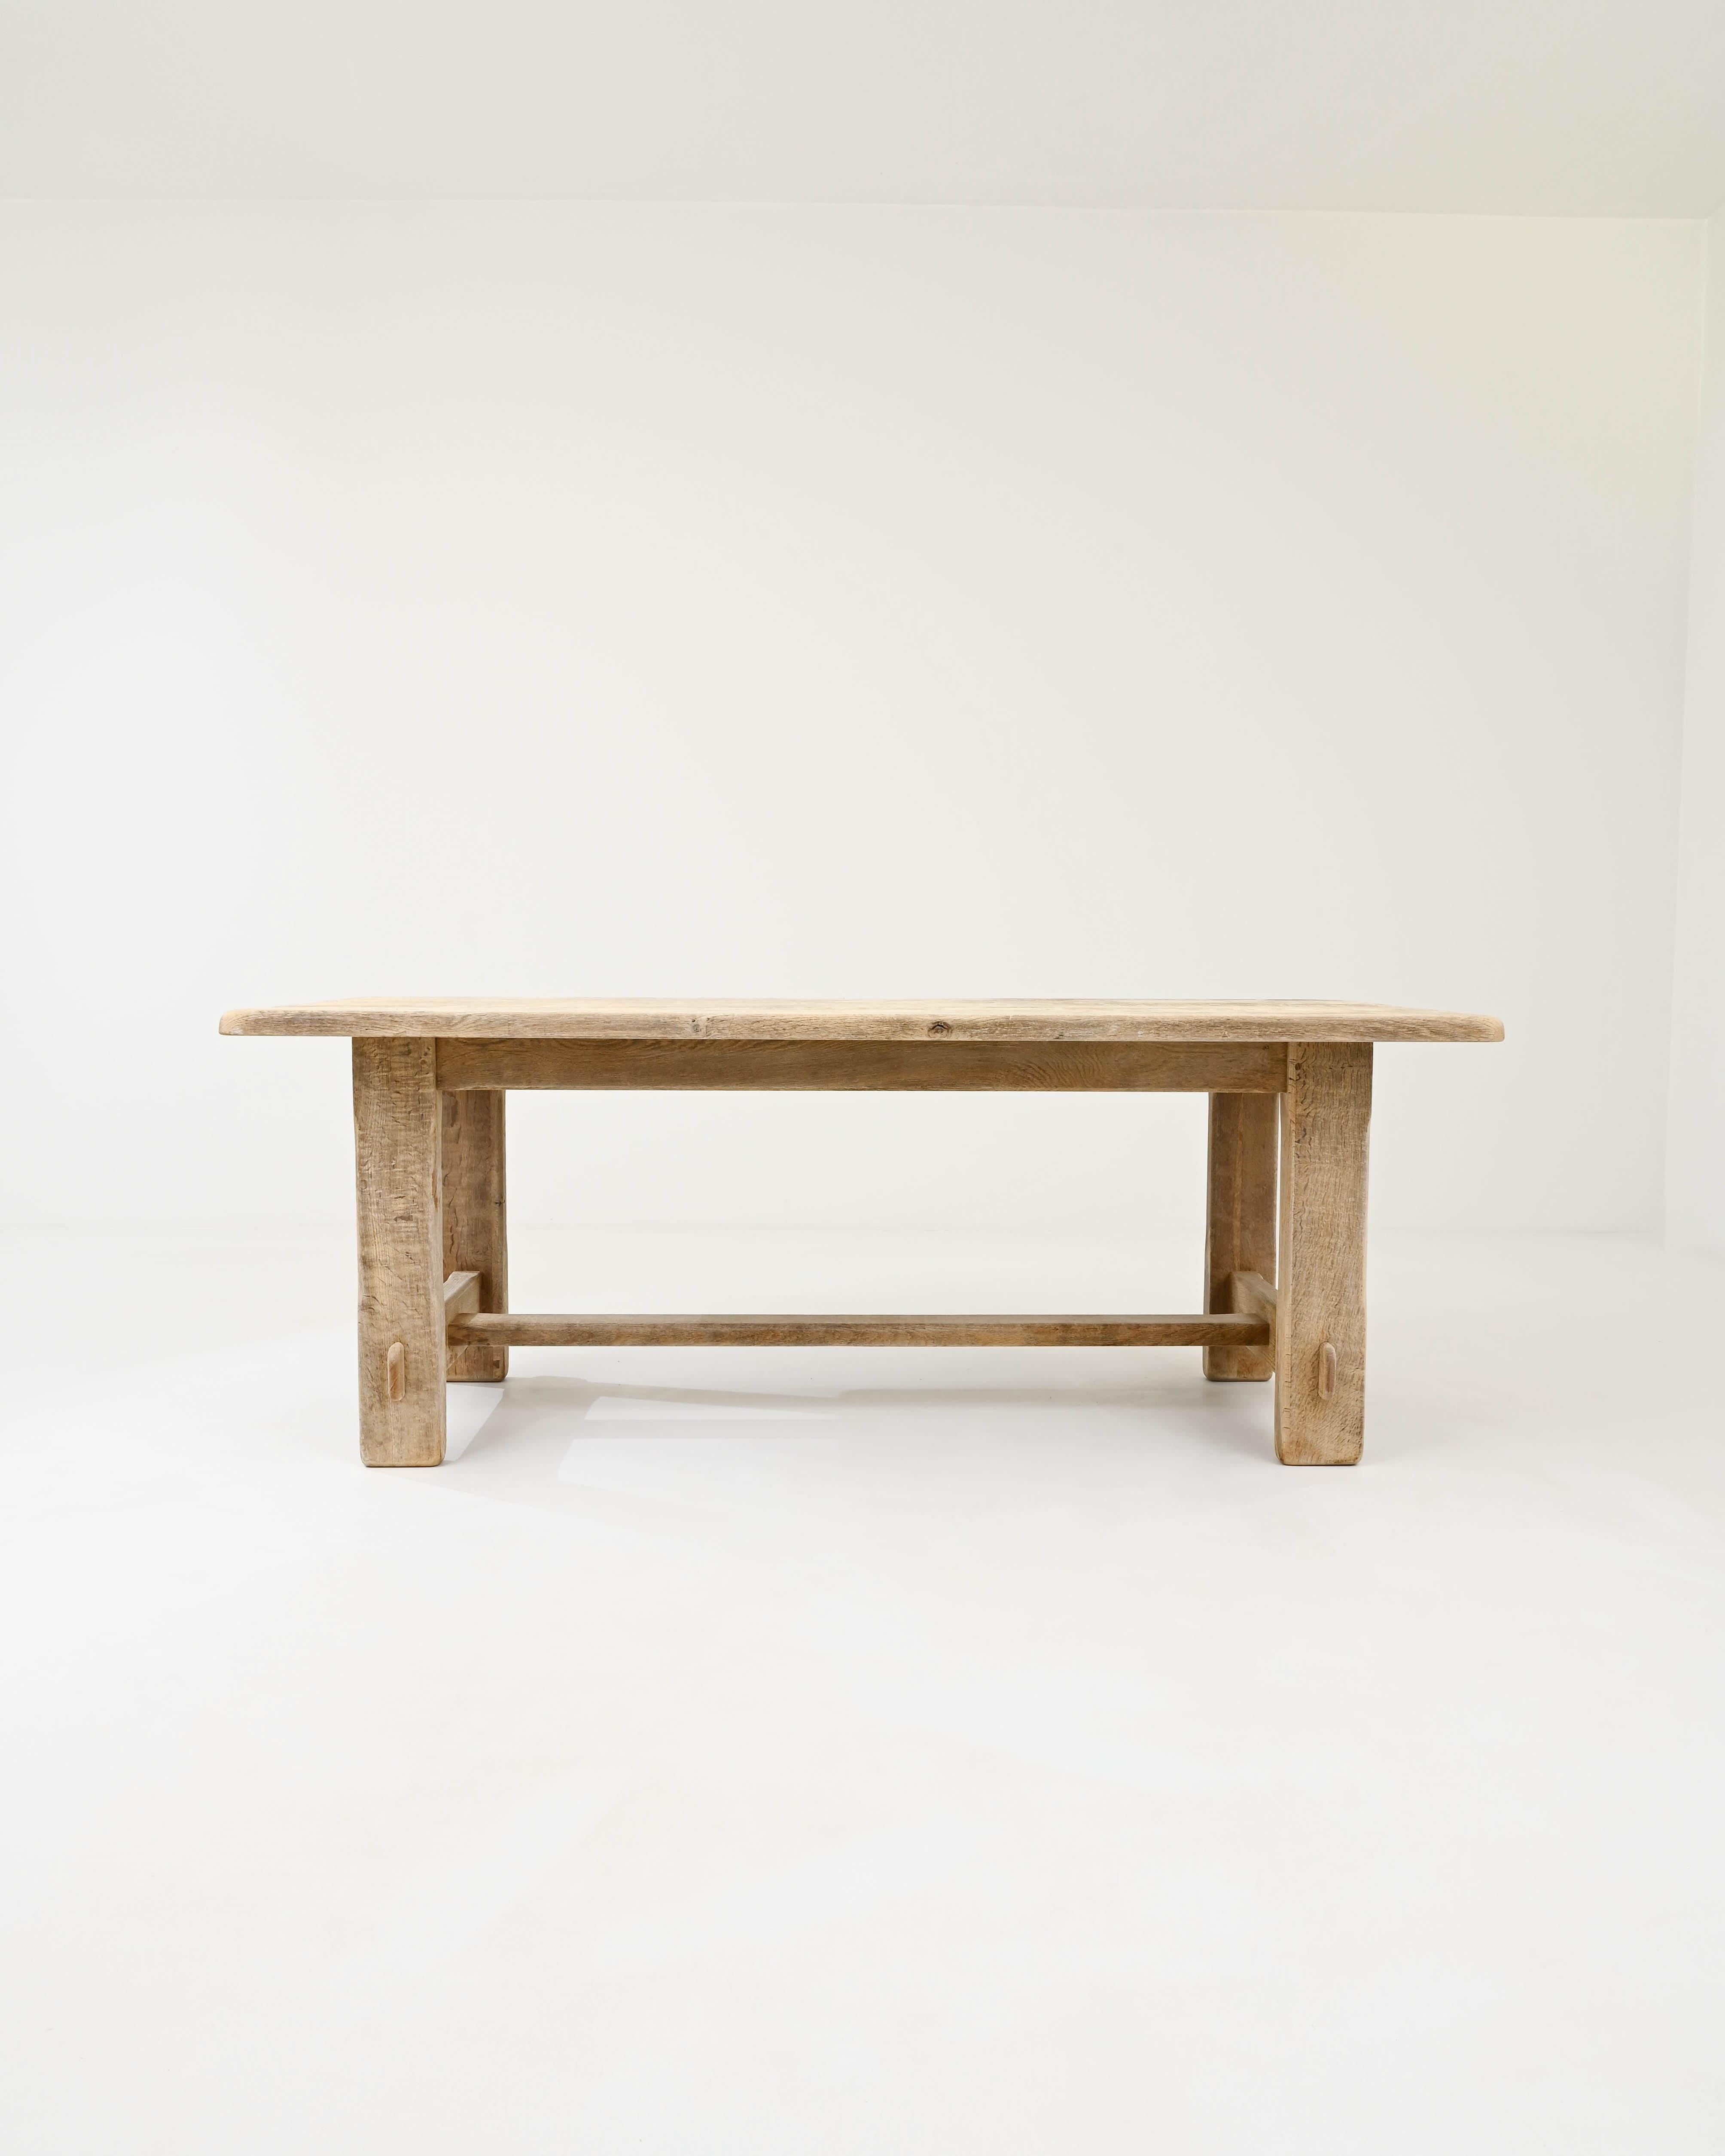 The rustic form and organic finish of this vintage oak dining table makes it an attractive centerpiece. Built in Belgium in the 20th century, the design offers a playful interpretation of the typical Provincial trestle table, making use of flat